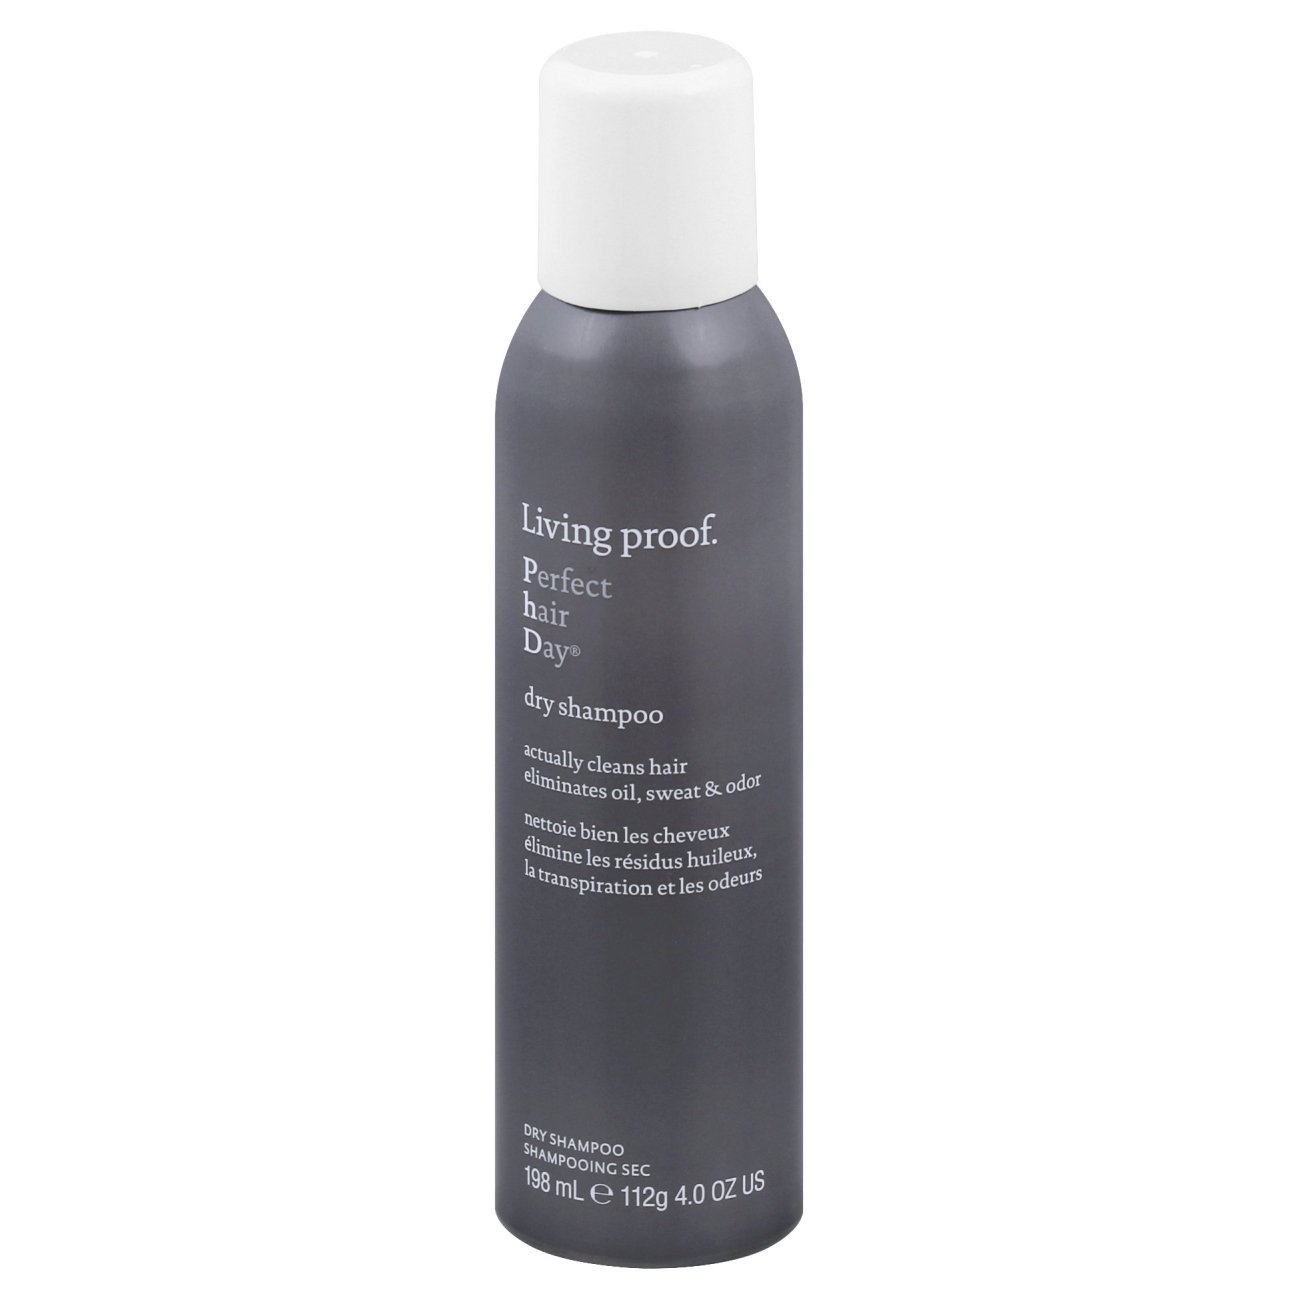 Living Proof Perfect Hair Day Dry Shampoo - Shop Hair Care at H-E-B